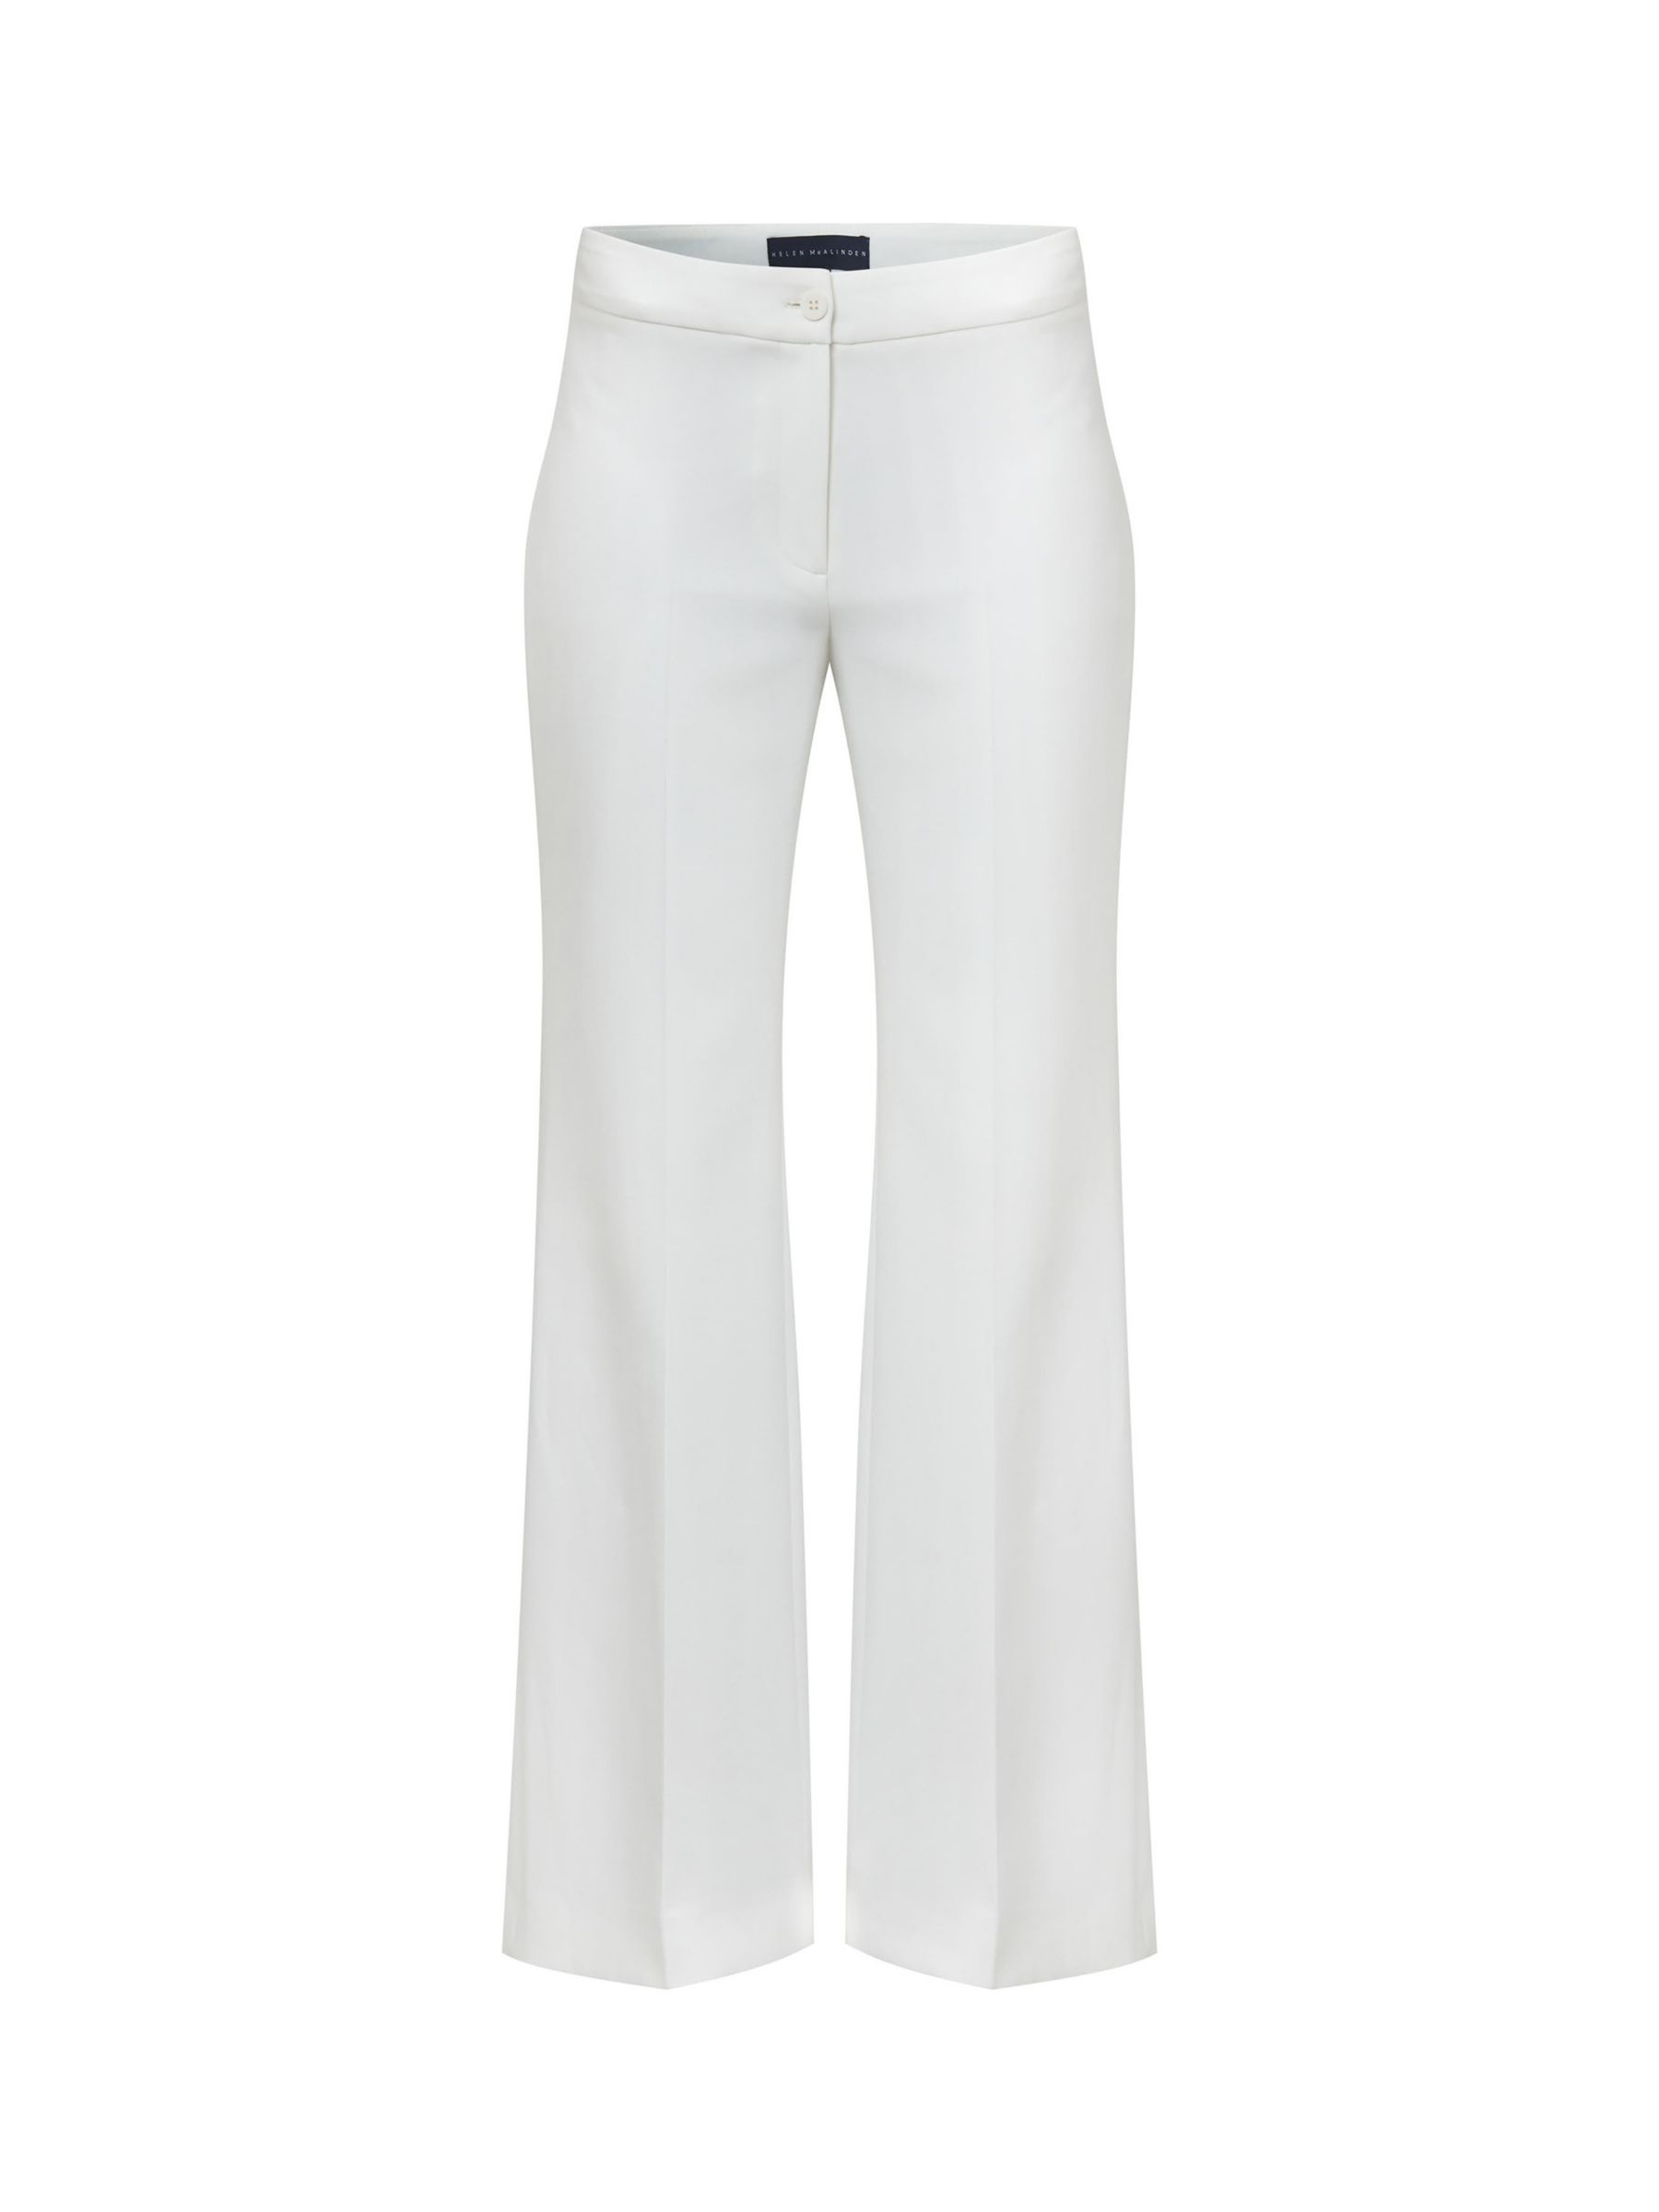 Helen McAlinden Kelly Trousers, White, 16